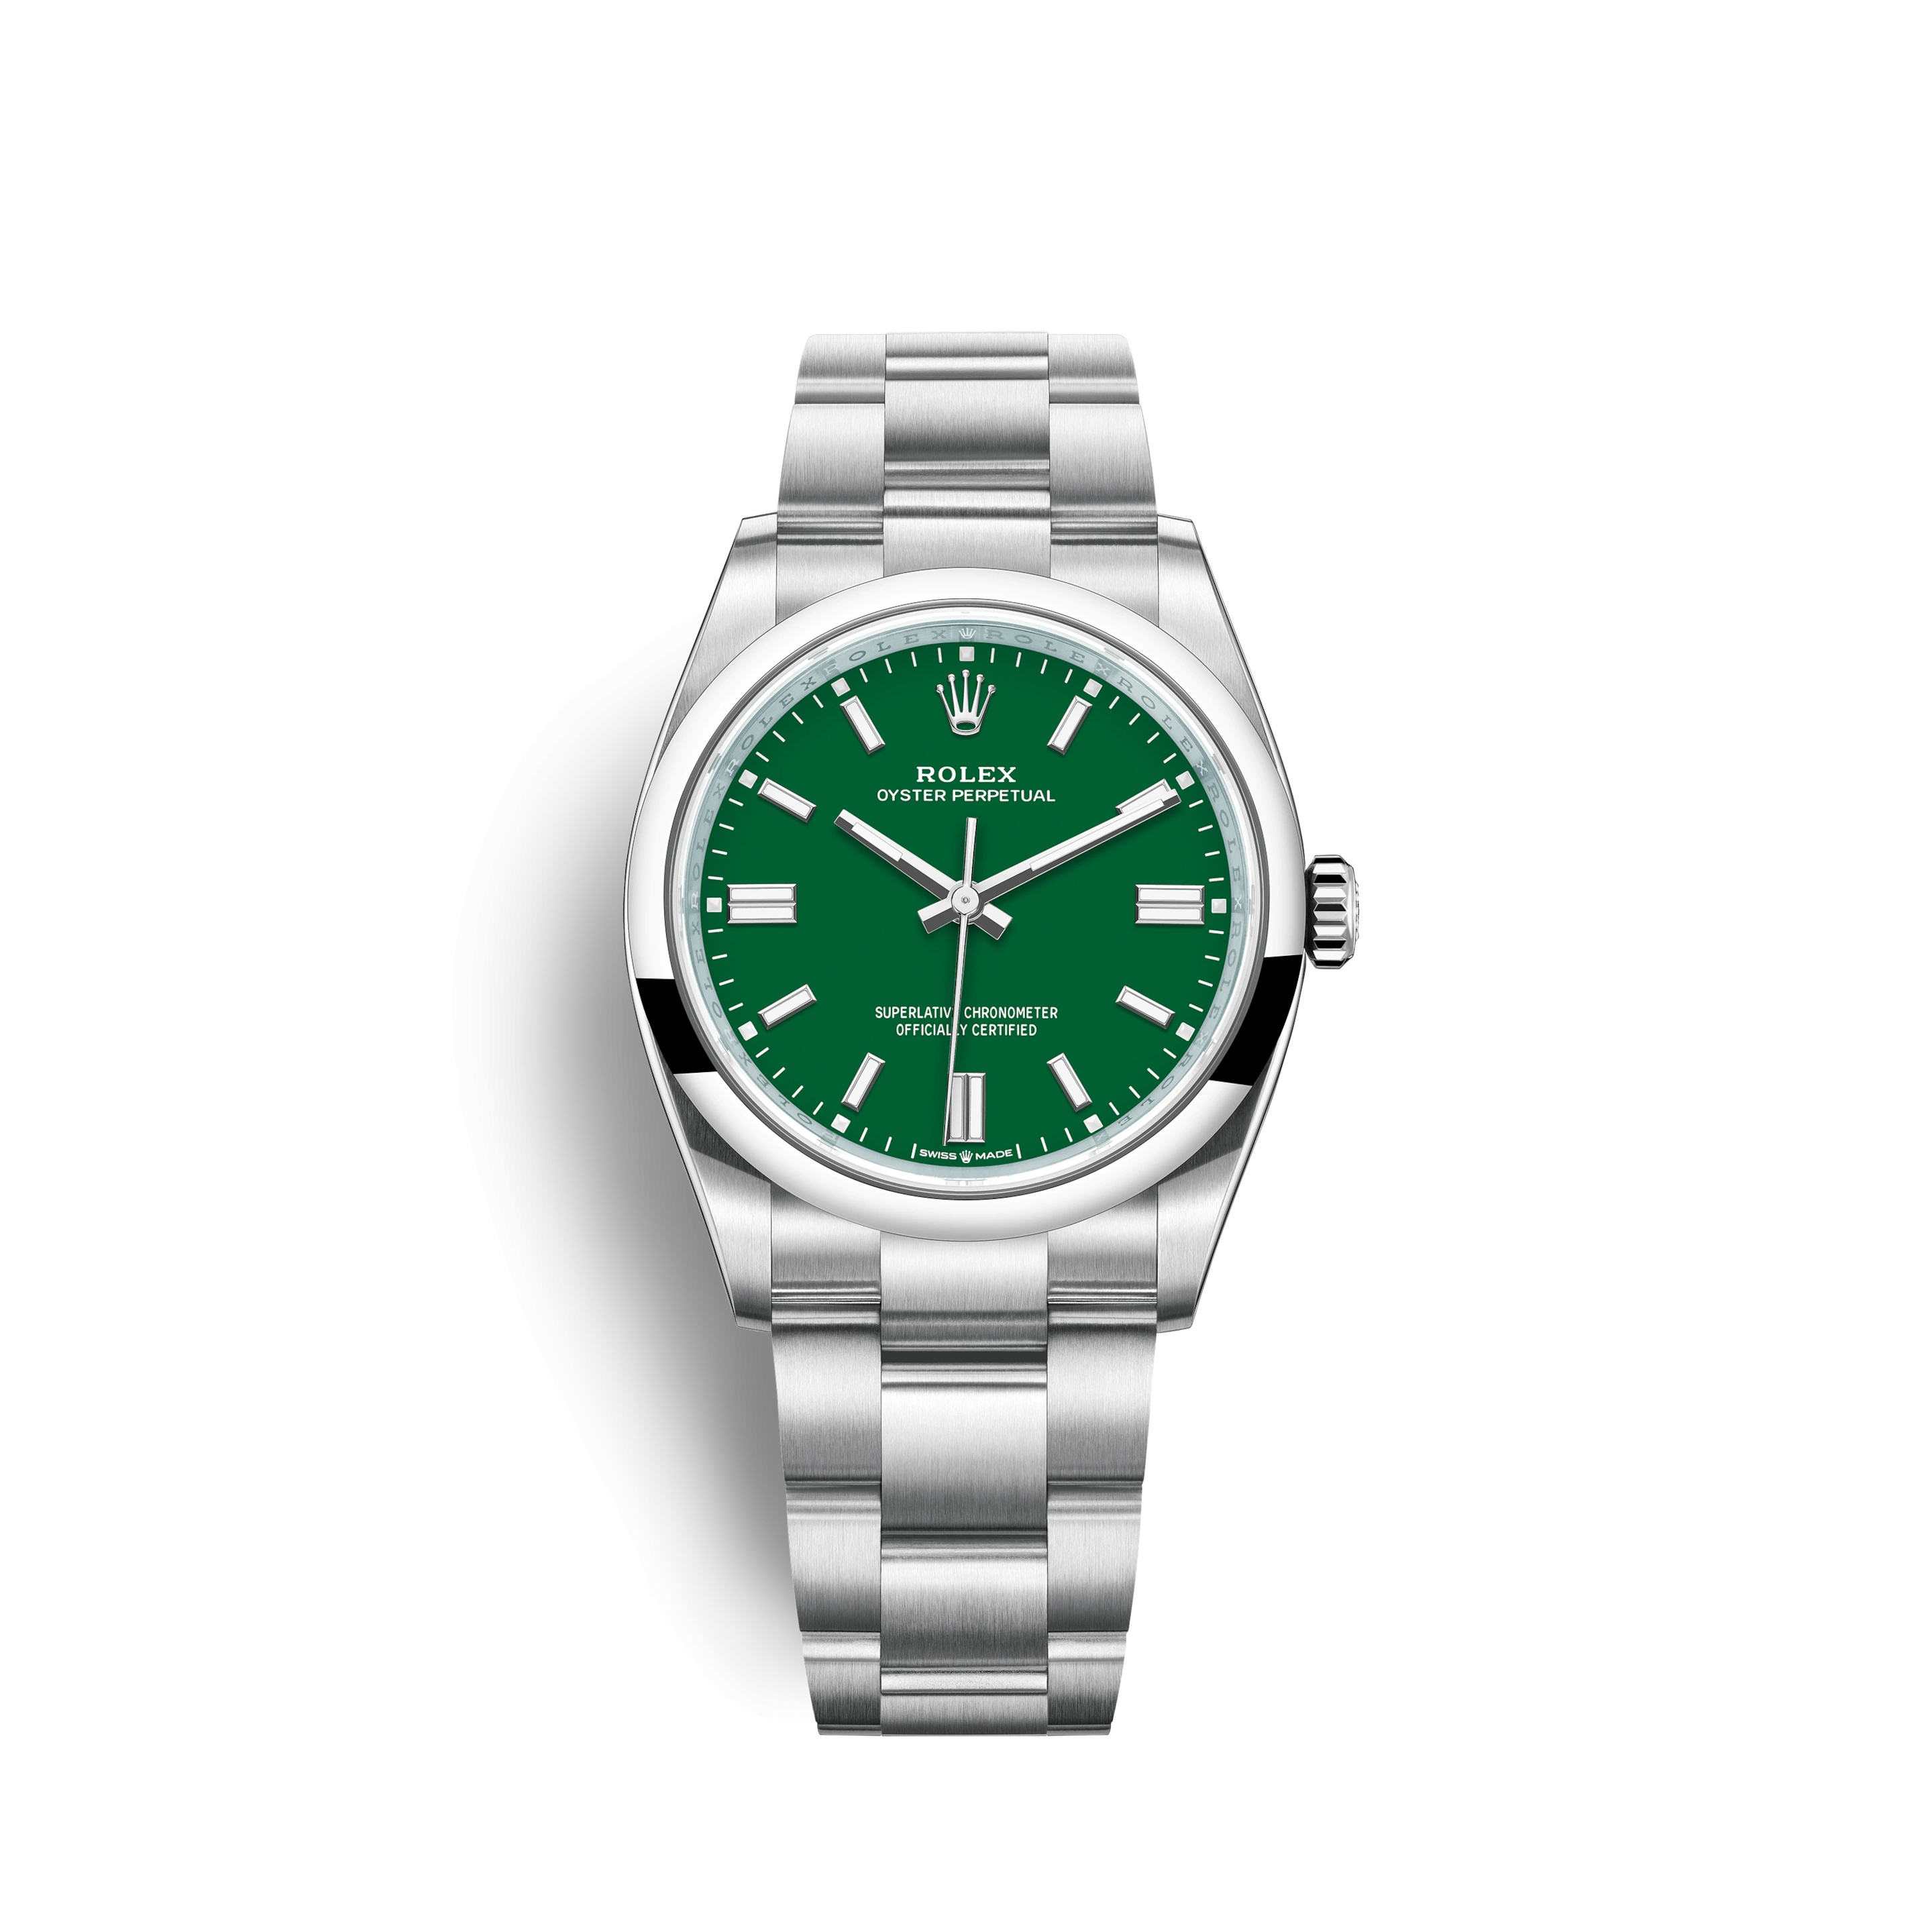 Rolex 126000 0005 Oyster Perpetual 36 Stainless Steel Green Watchbase